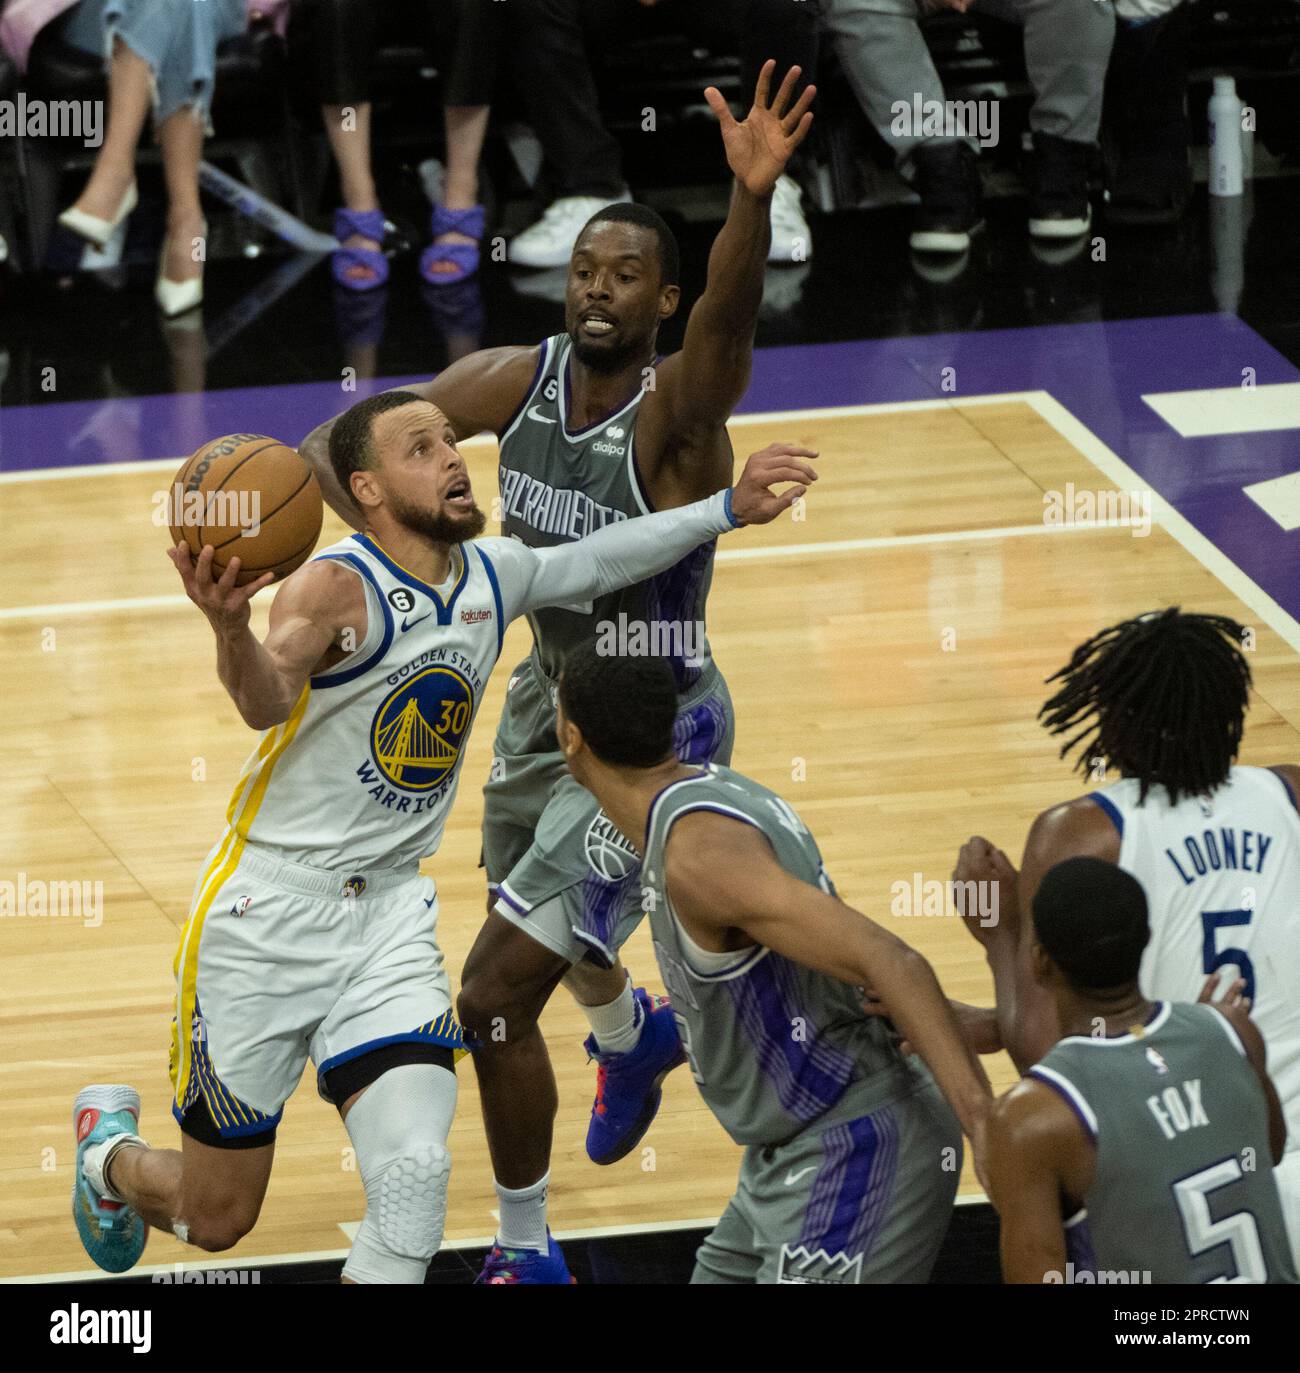 Official curry vs Fox golden state warriors at sacramento kings